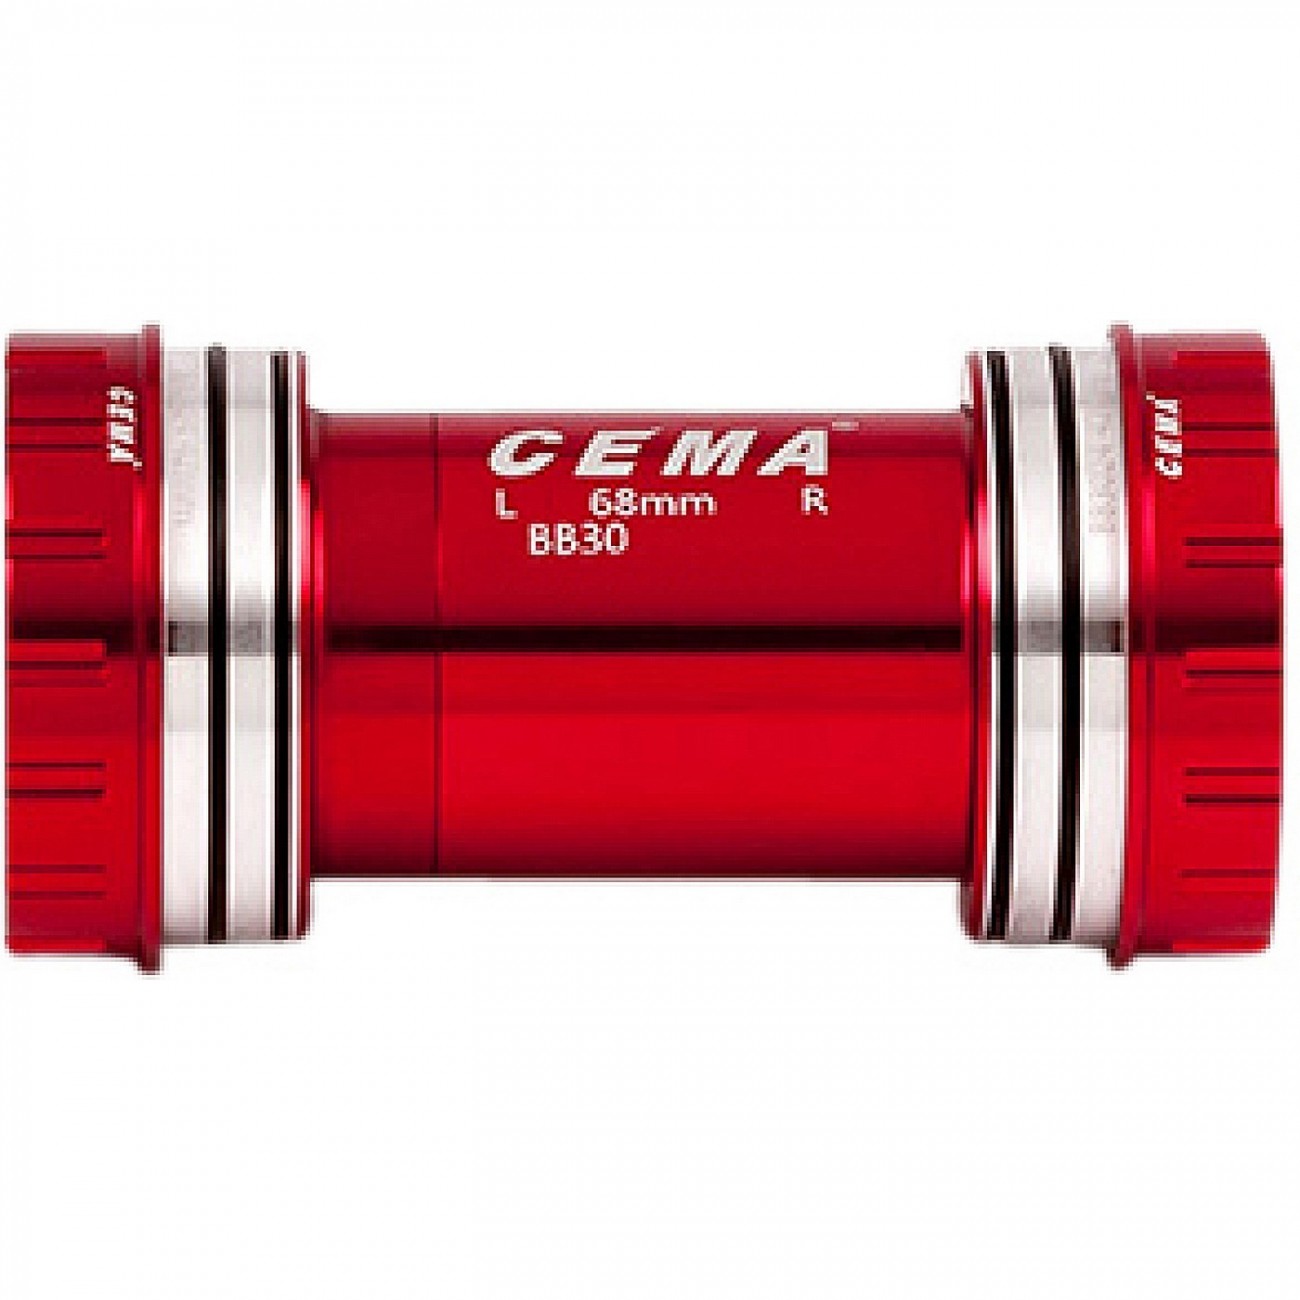 Bb30 for sram gxp w: 68/73 x id: 42 mm stainless steel - red interlock - 1